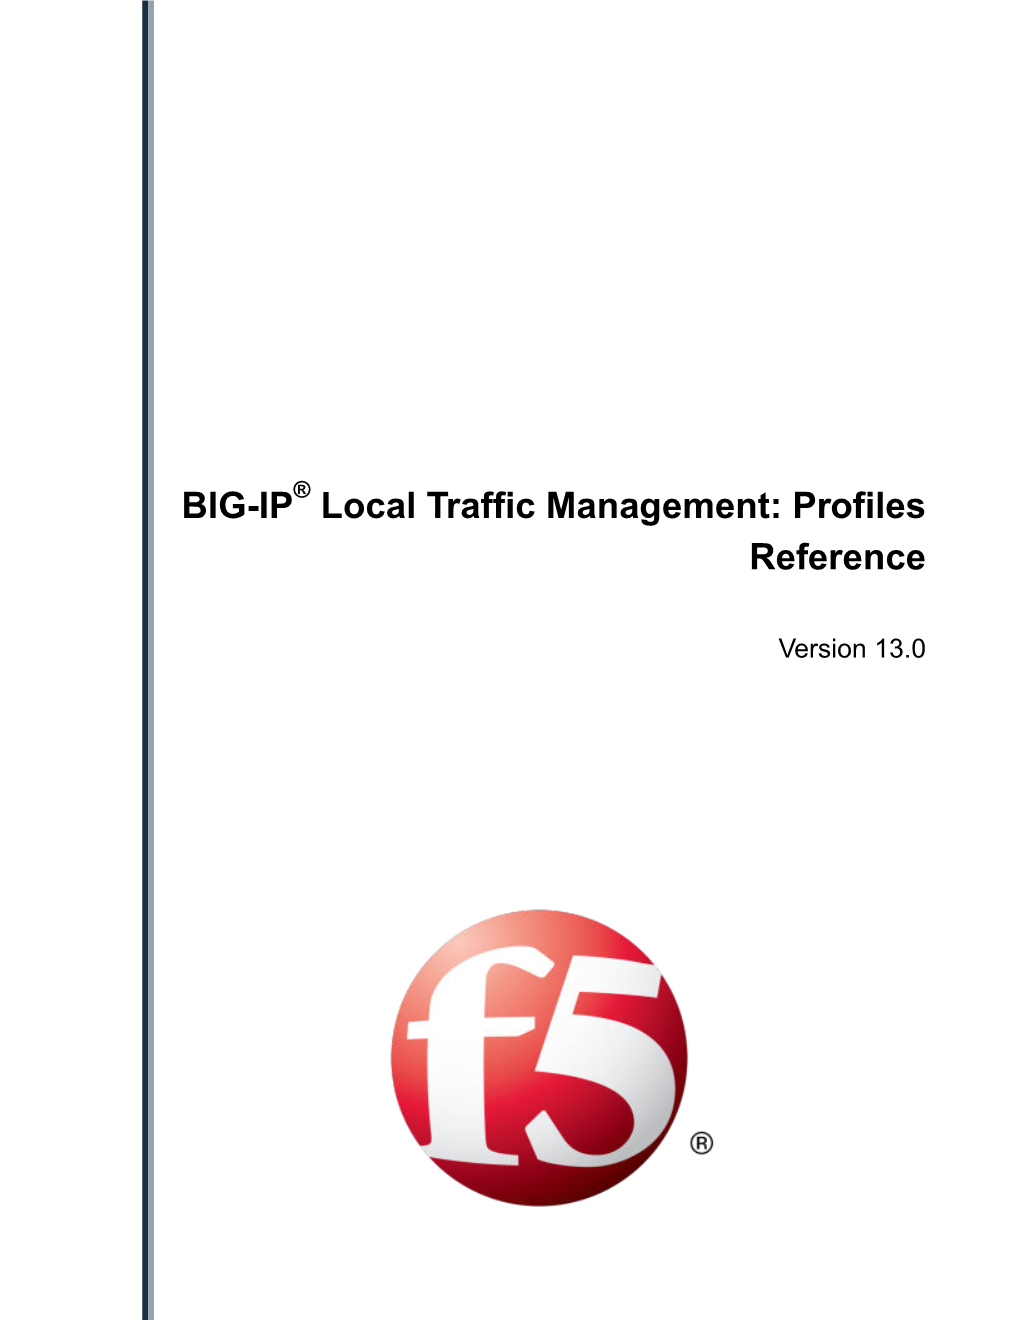 BIG-IP Local Traffic Management: Profiles Reference